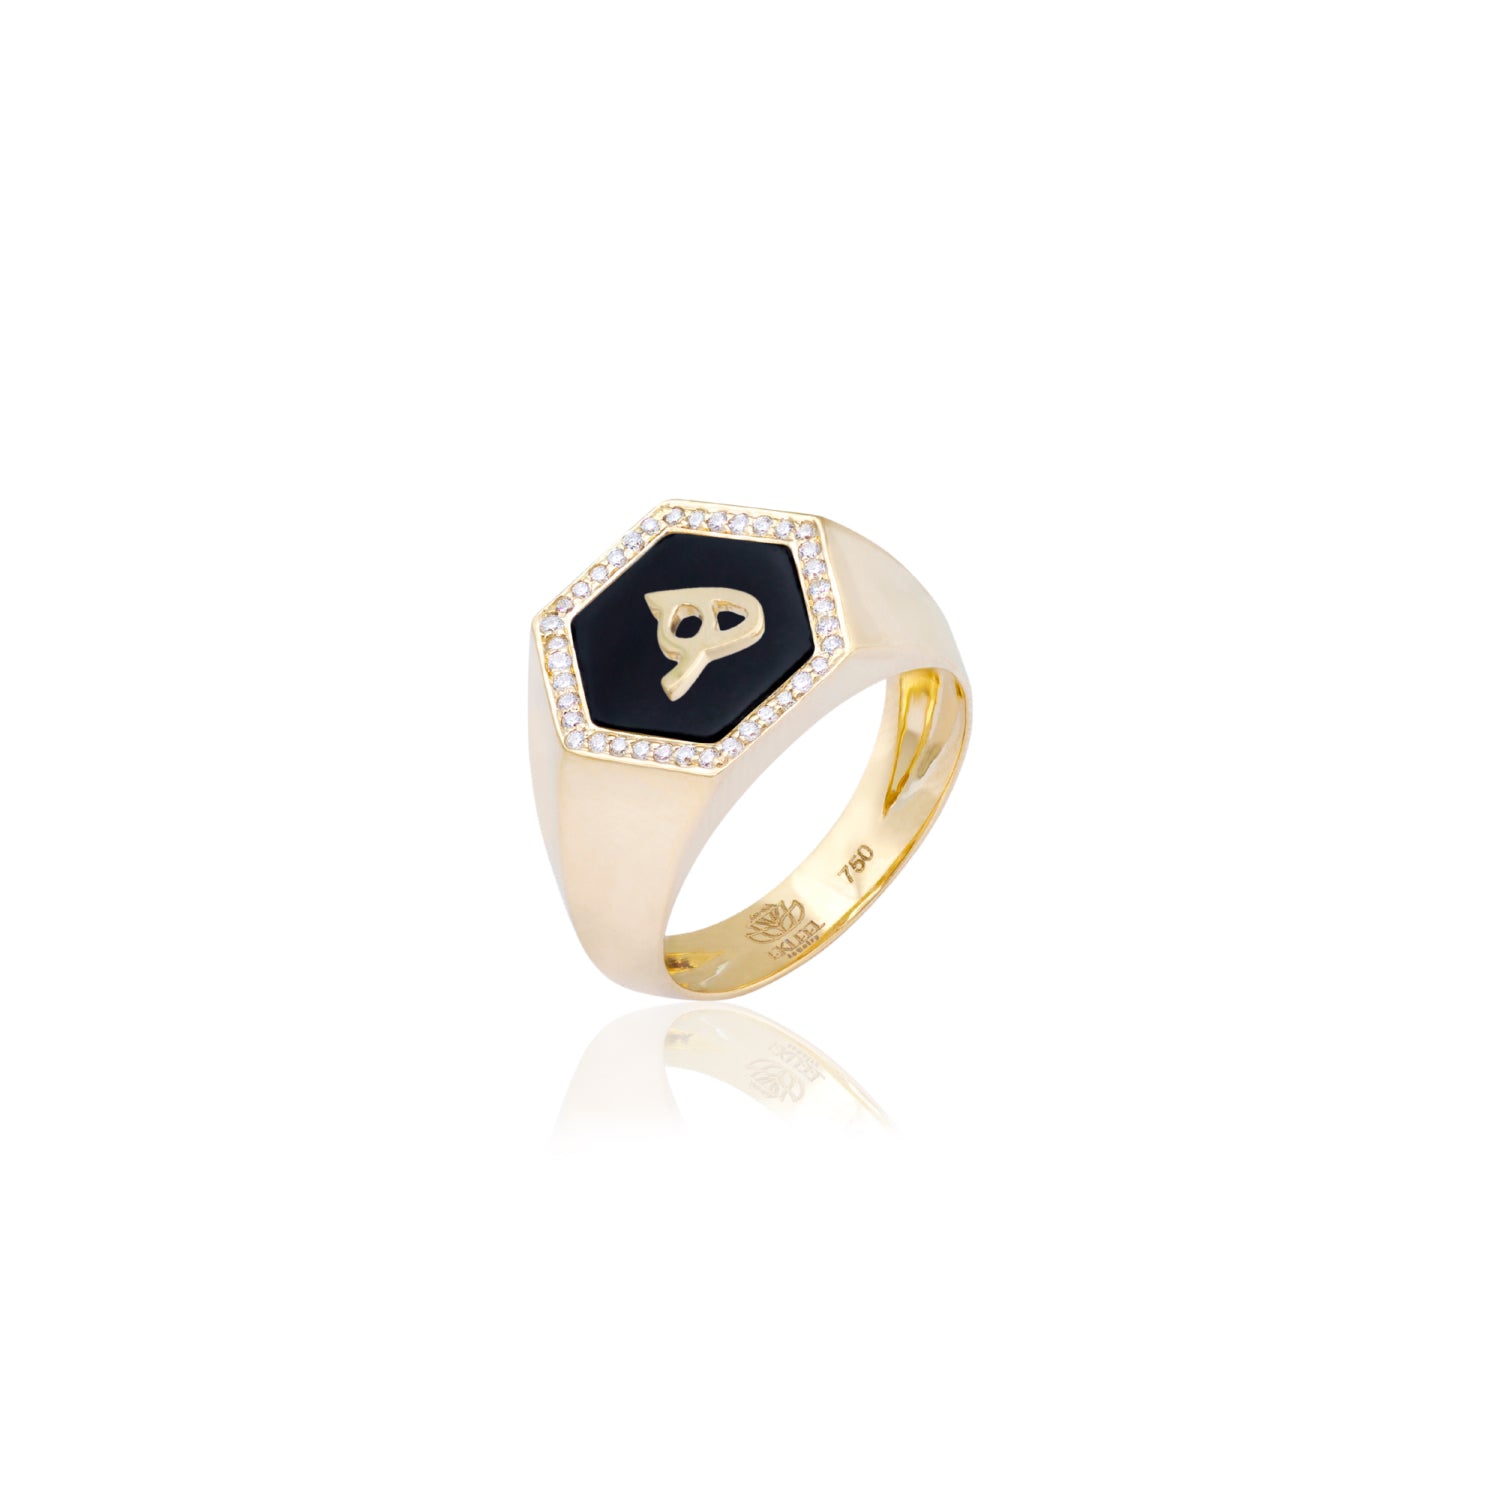 Qamoos 2.0 Letter هـ Onyx and Diamond Signet Ring in Yellow Gold